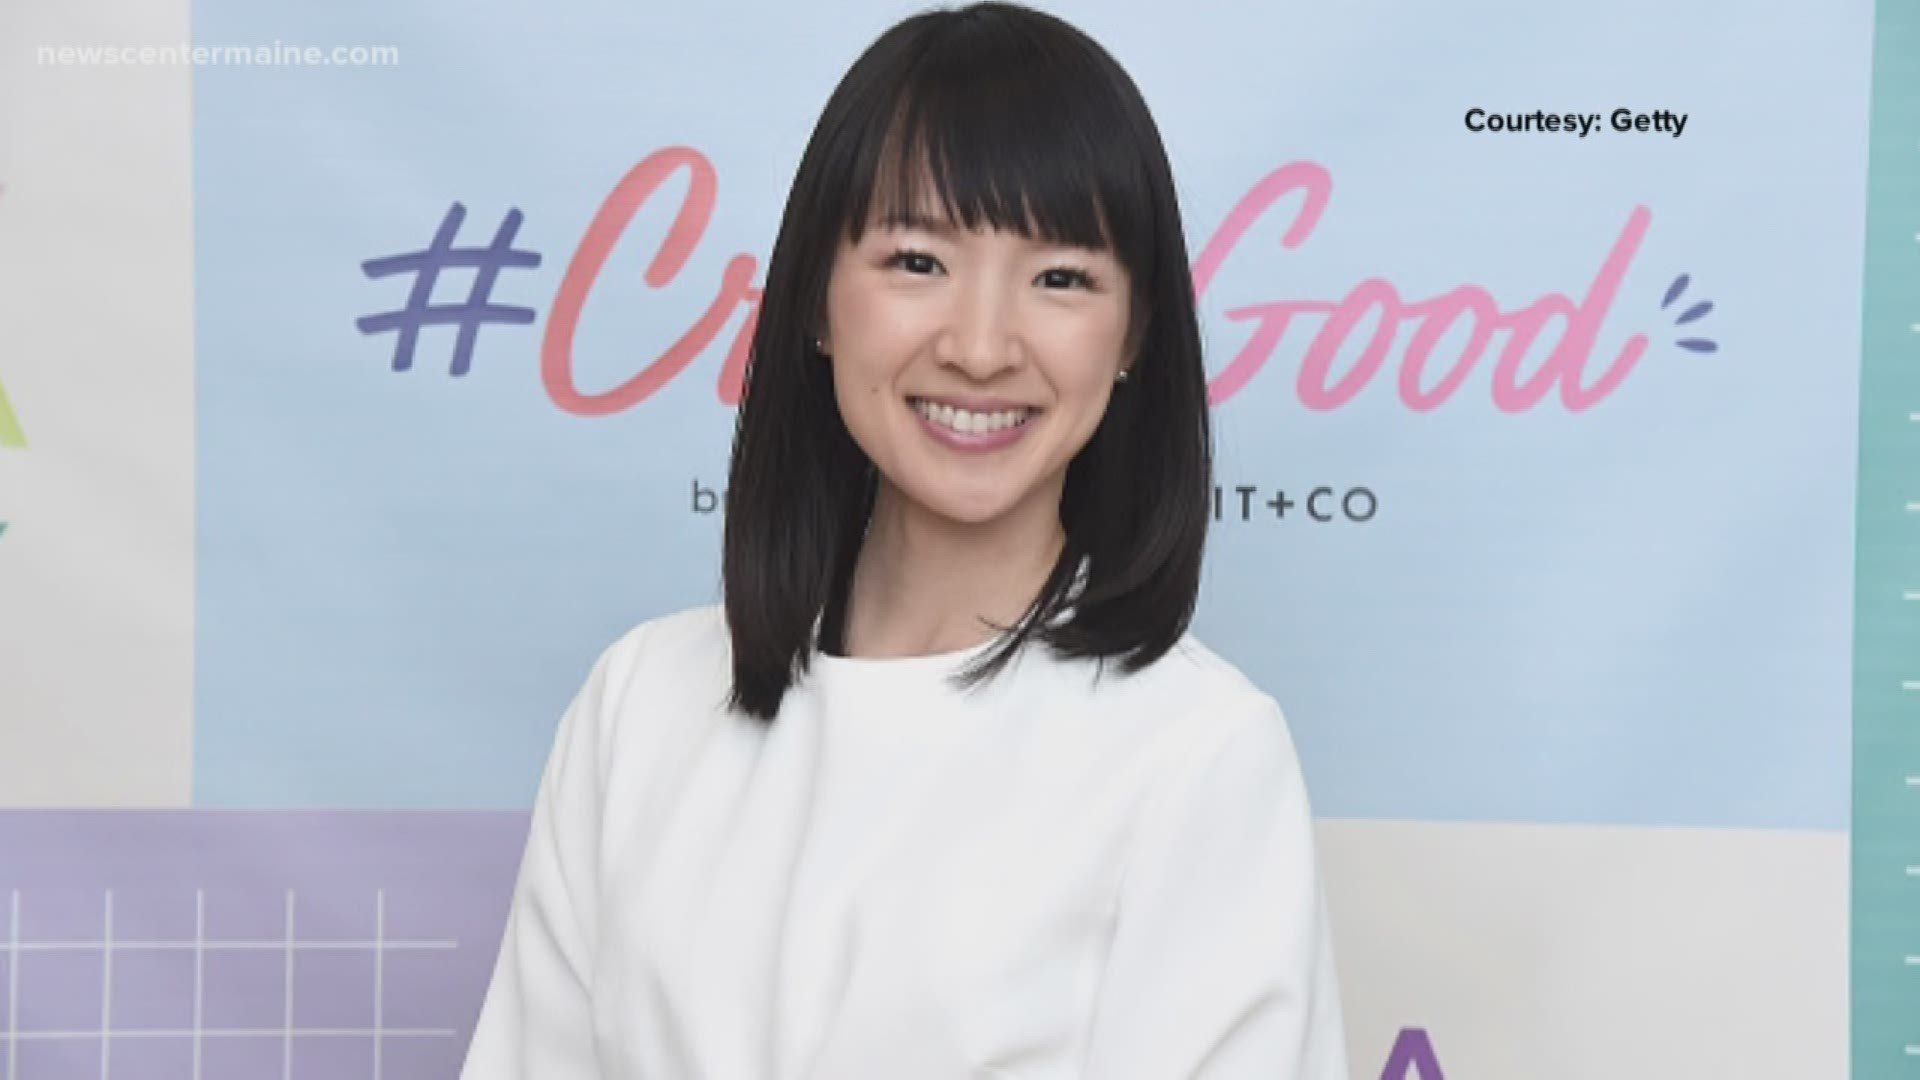 Goodwill rush. A new show that debuted at the start of the new year on Netflix. Marie Kondo's tidying up.